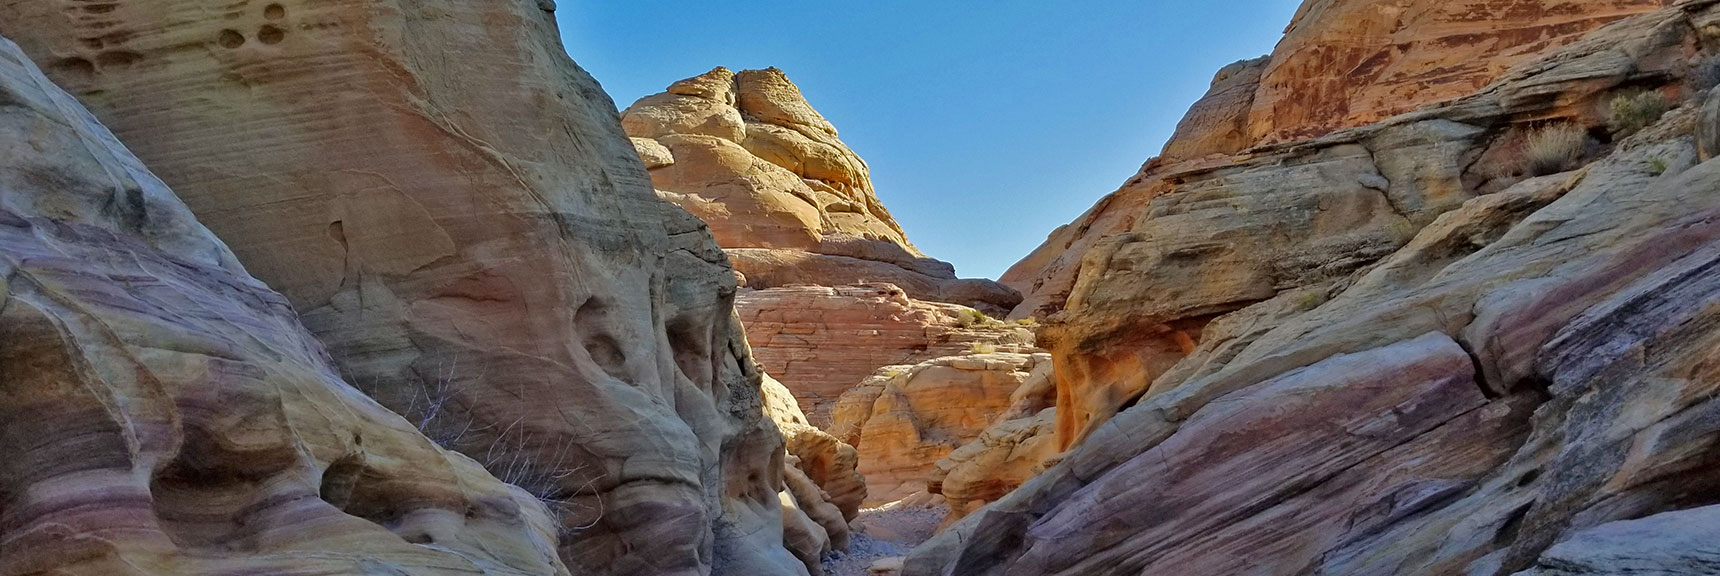 Passing Through Firewave Rocks While Descending Through the Northern Canyon Wash on Prospect Trail in Valley of Fire State Park, Nevada Prospect Trail in Valley of Fire State Park, Nevada